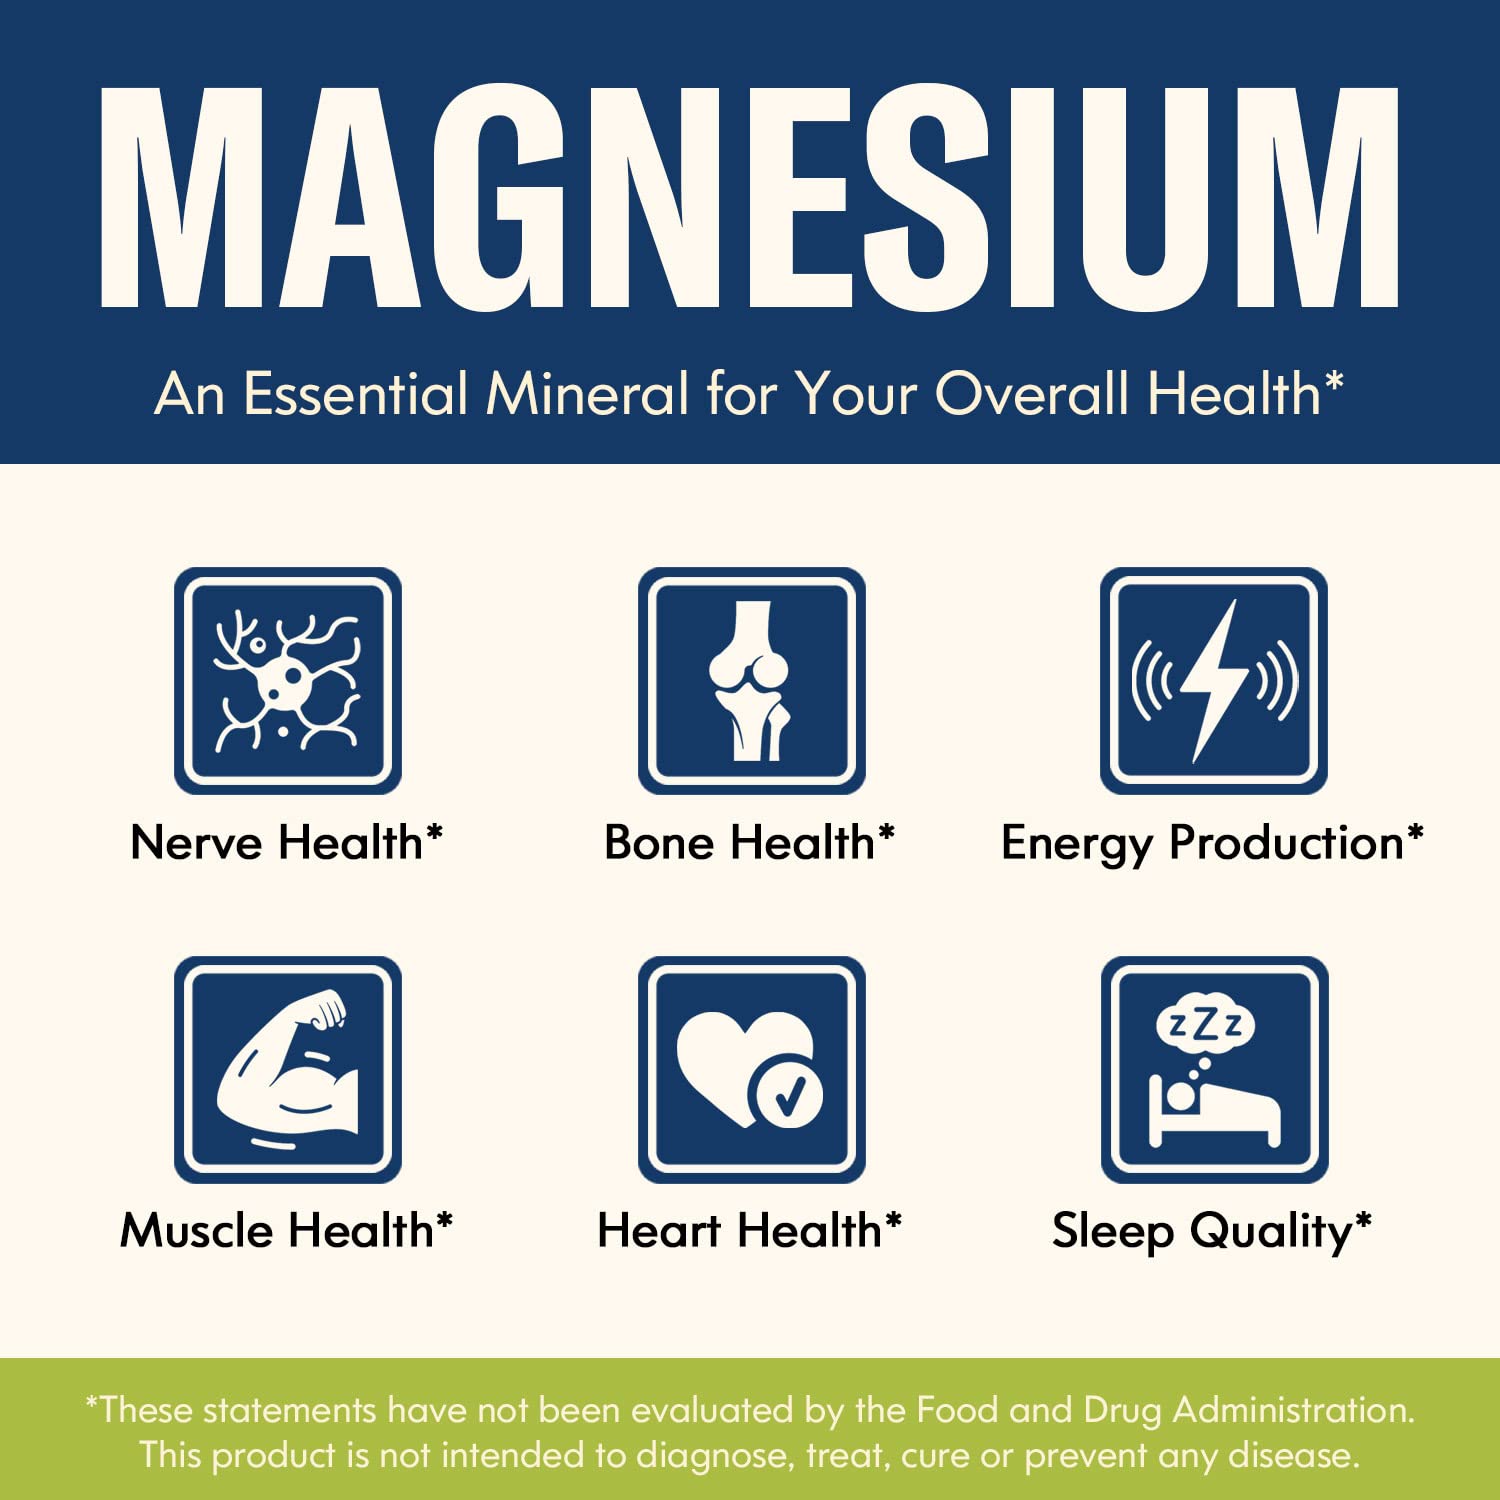 FoodForth Magnesium Glycinate, 160mg Elemental Magnesium, Chelated for Superior Absorption, Gentle on Stomach, Supports Muscle, Nerve, Heart Health, Non-GMO, No Gluten, Made in USA, 90 Veggie Capsules